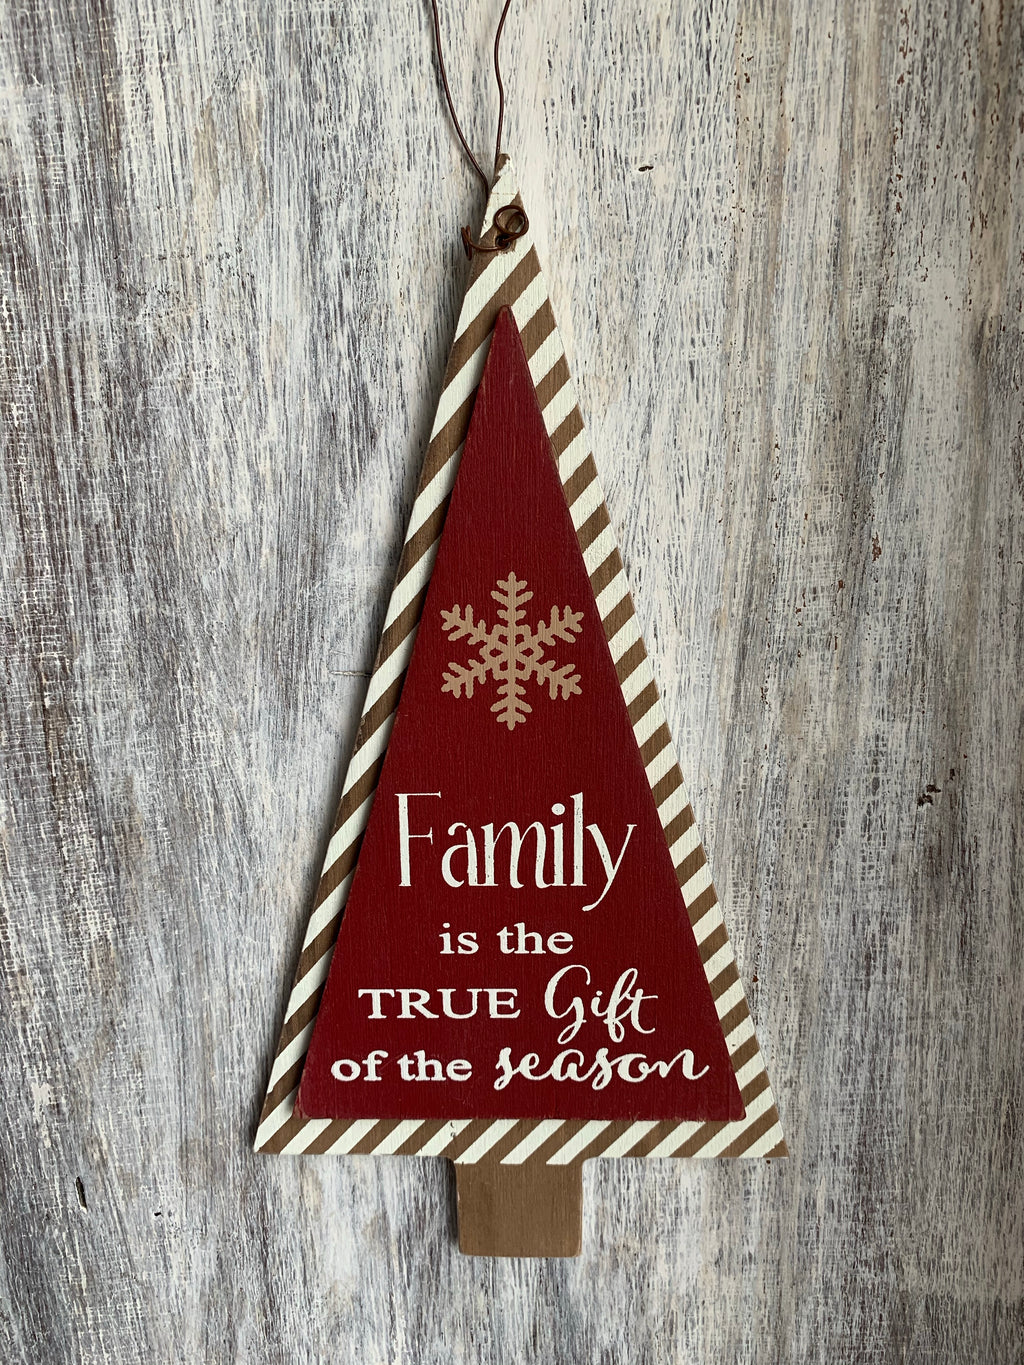 Assorted Red & White Striped Wooden Tree Ornament